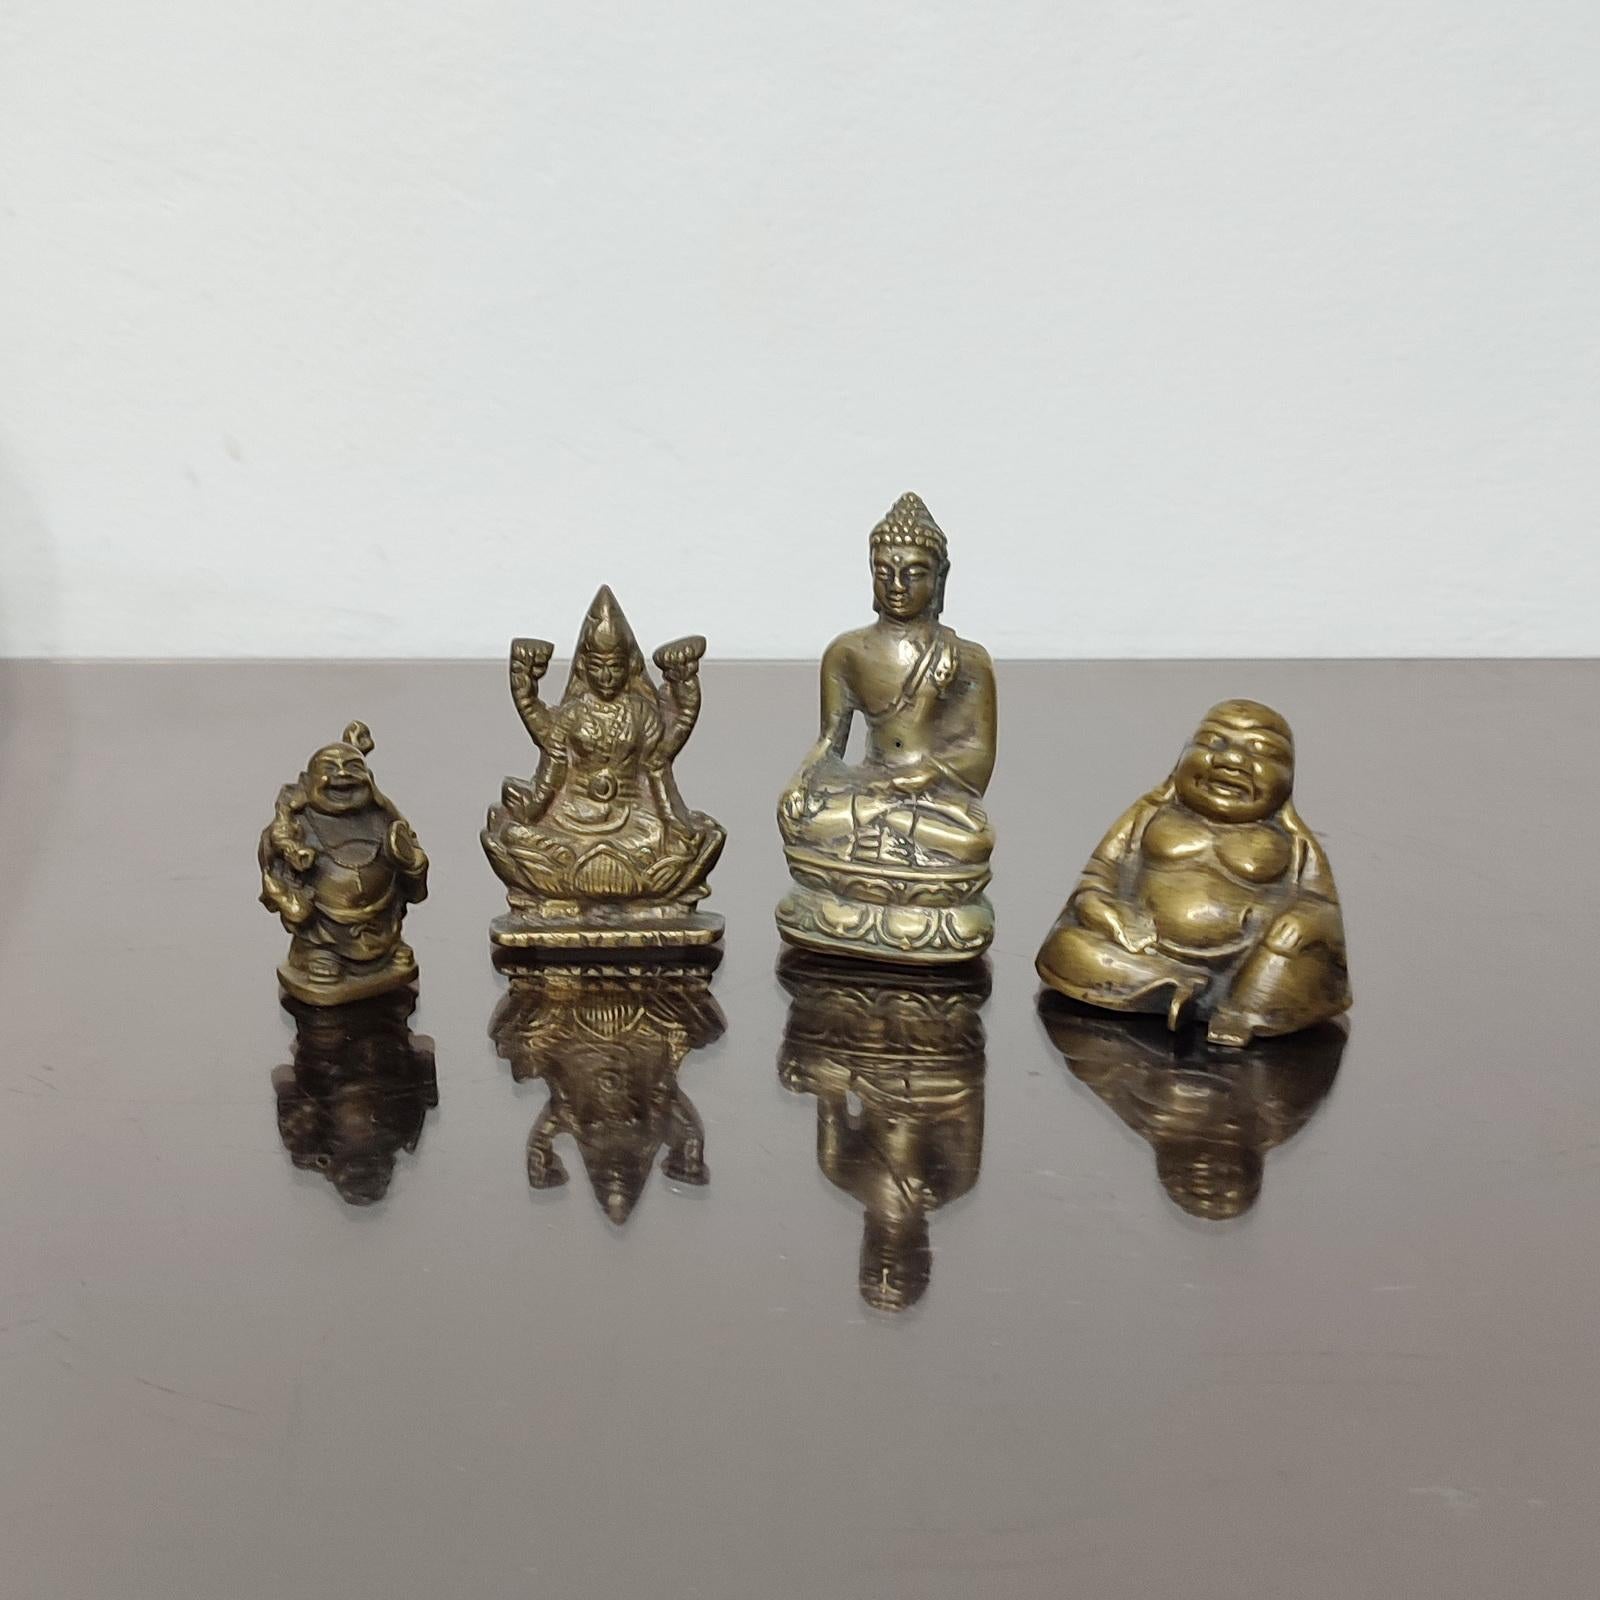 A beautiful collection of four miniature sculptures depicting Asian gods and Buddha. Vintage condition.
Dimensions: Height from 5 to 9 cm.